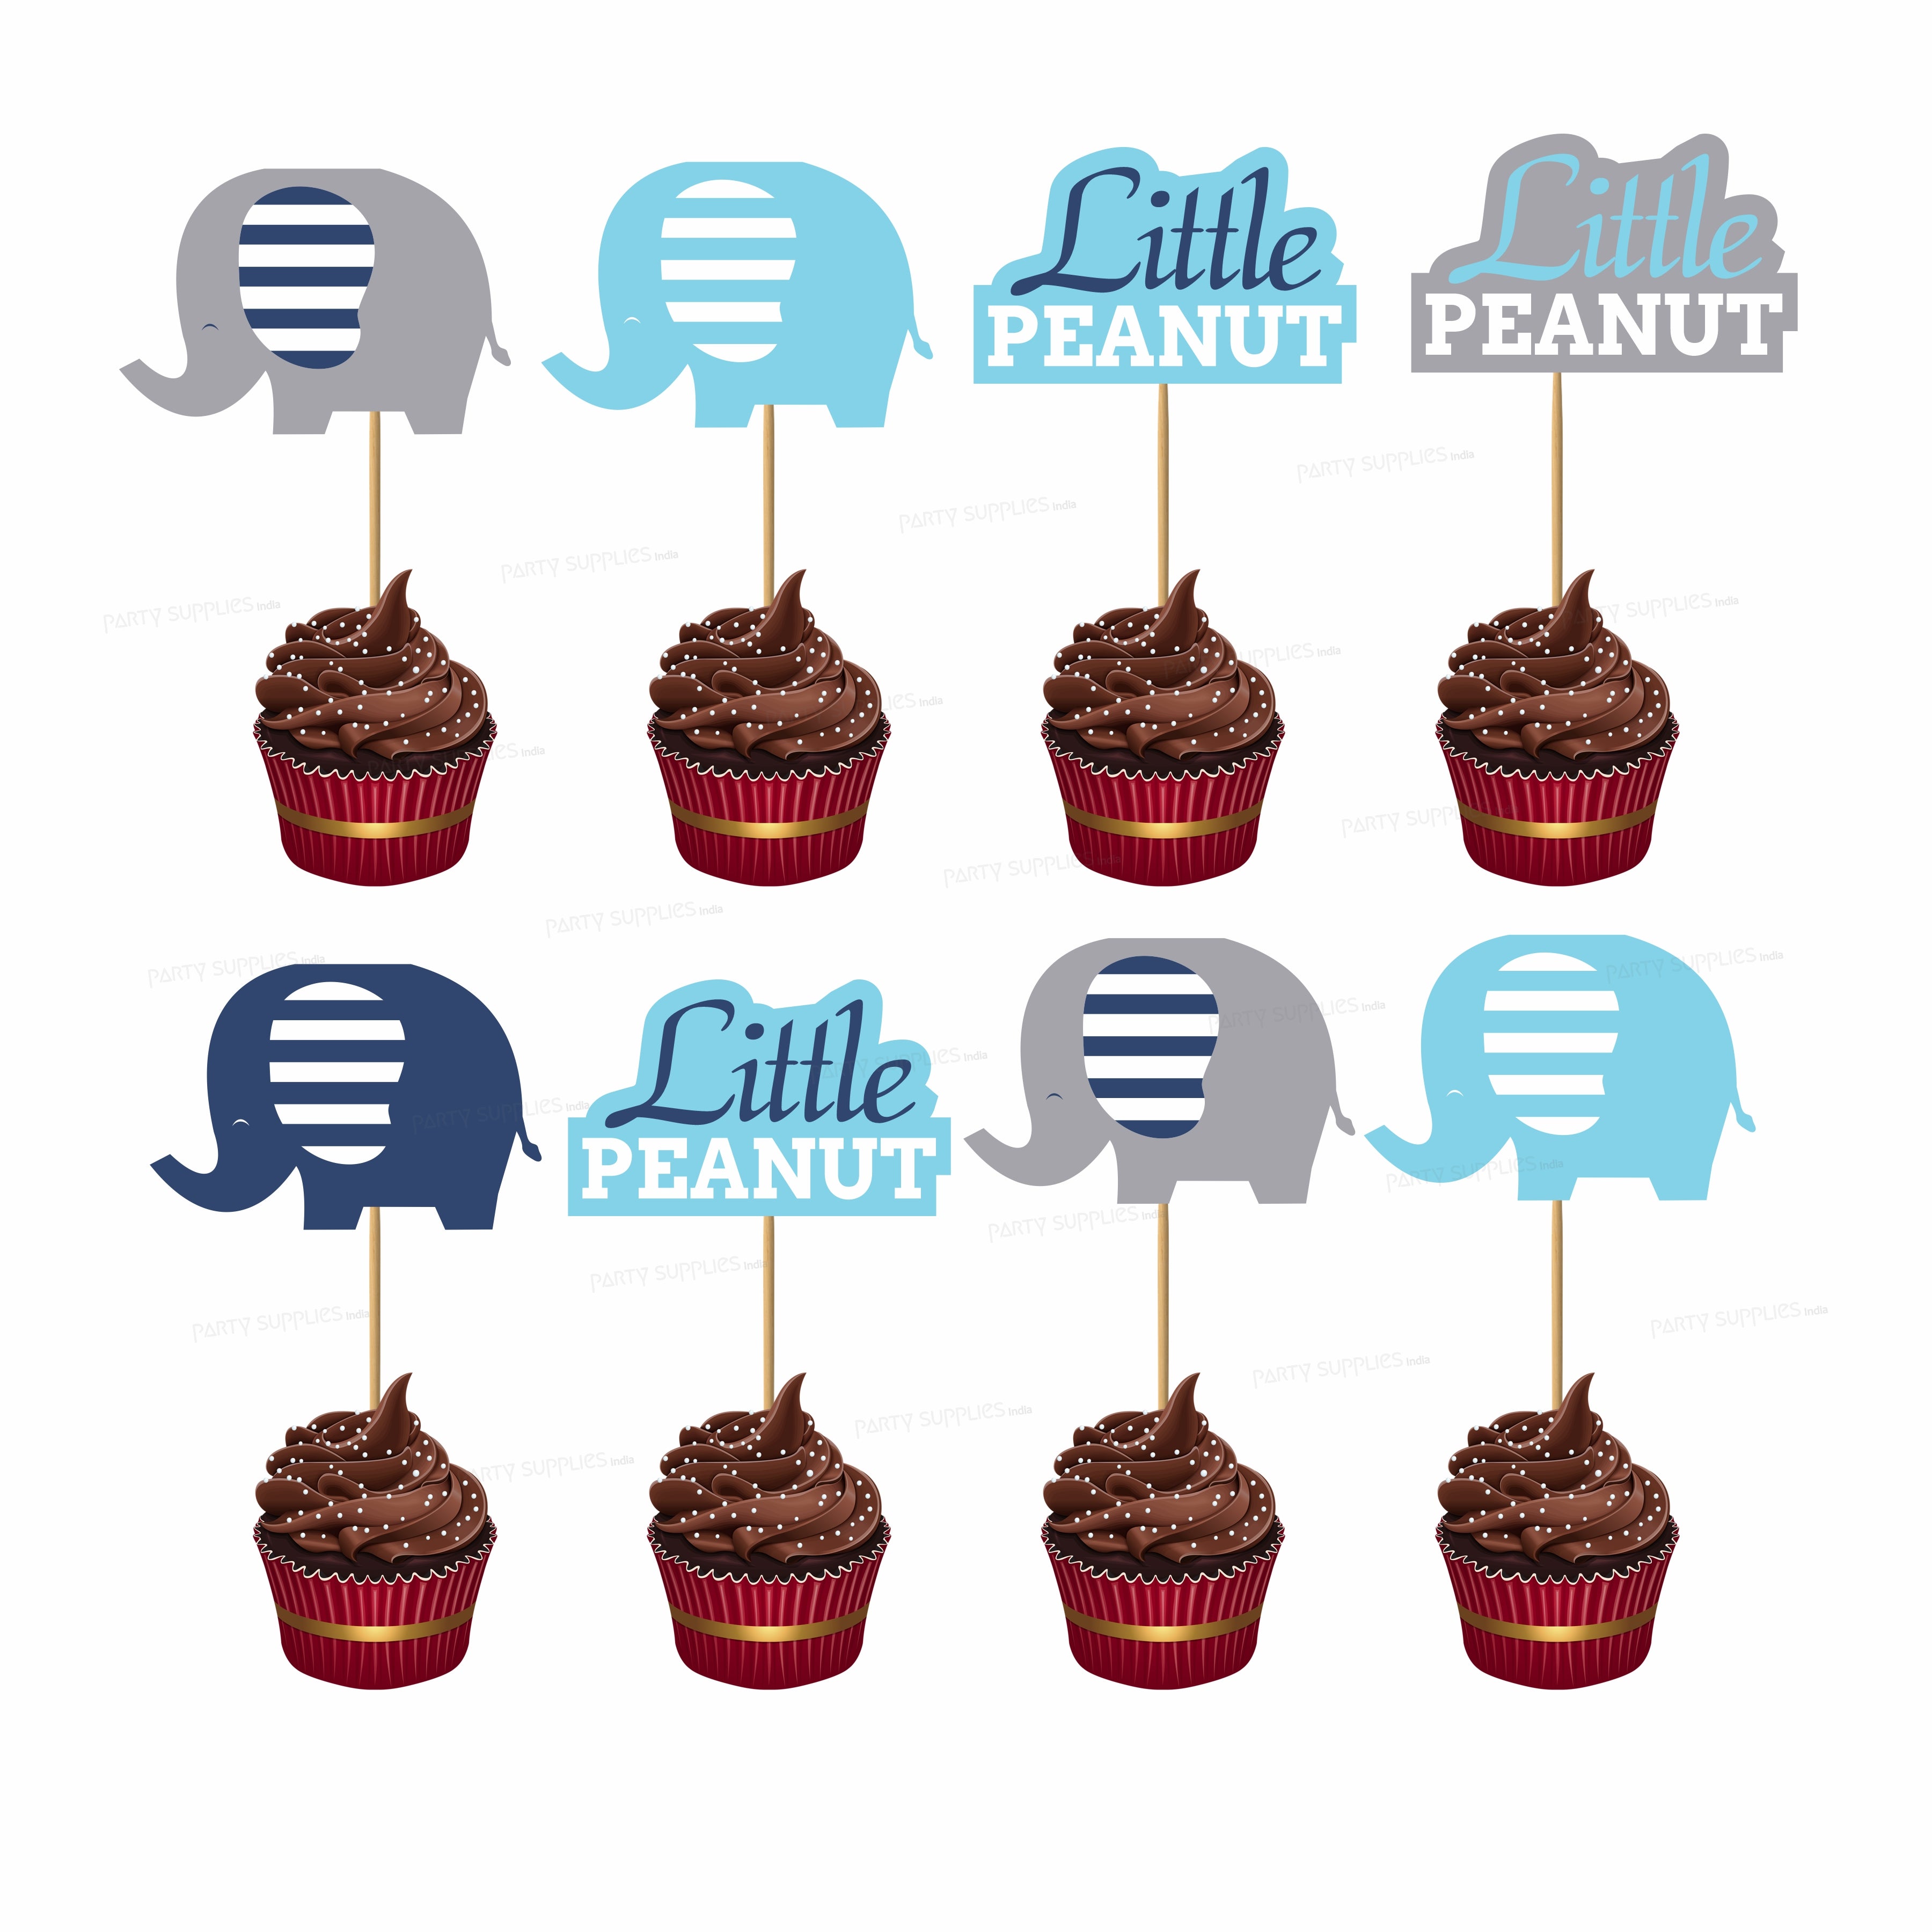 PSI Blue Elephant Theme Cup Personalized Cake Topper